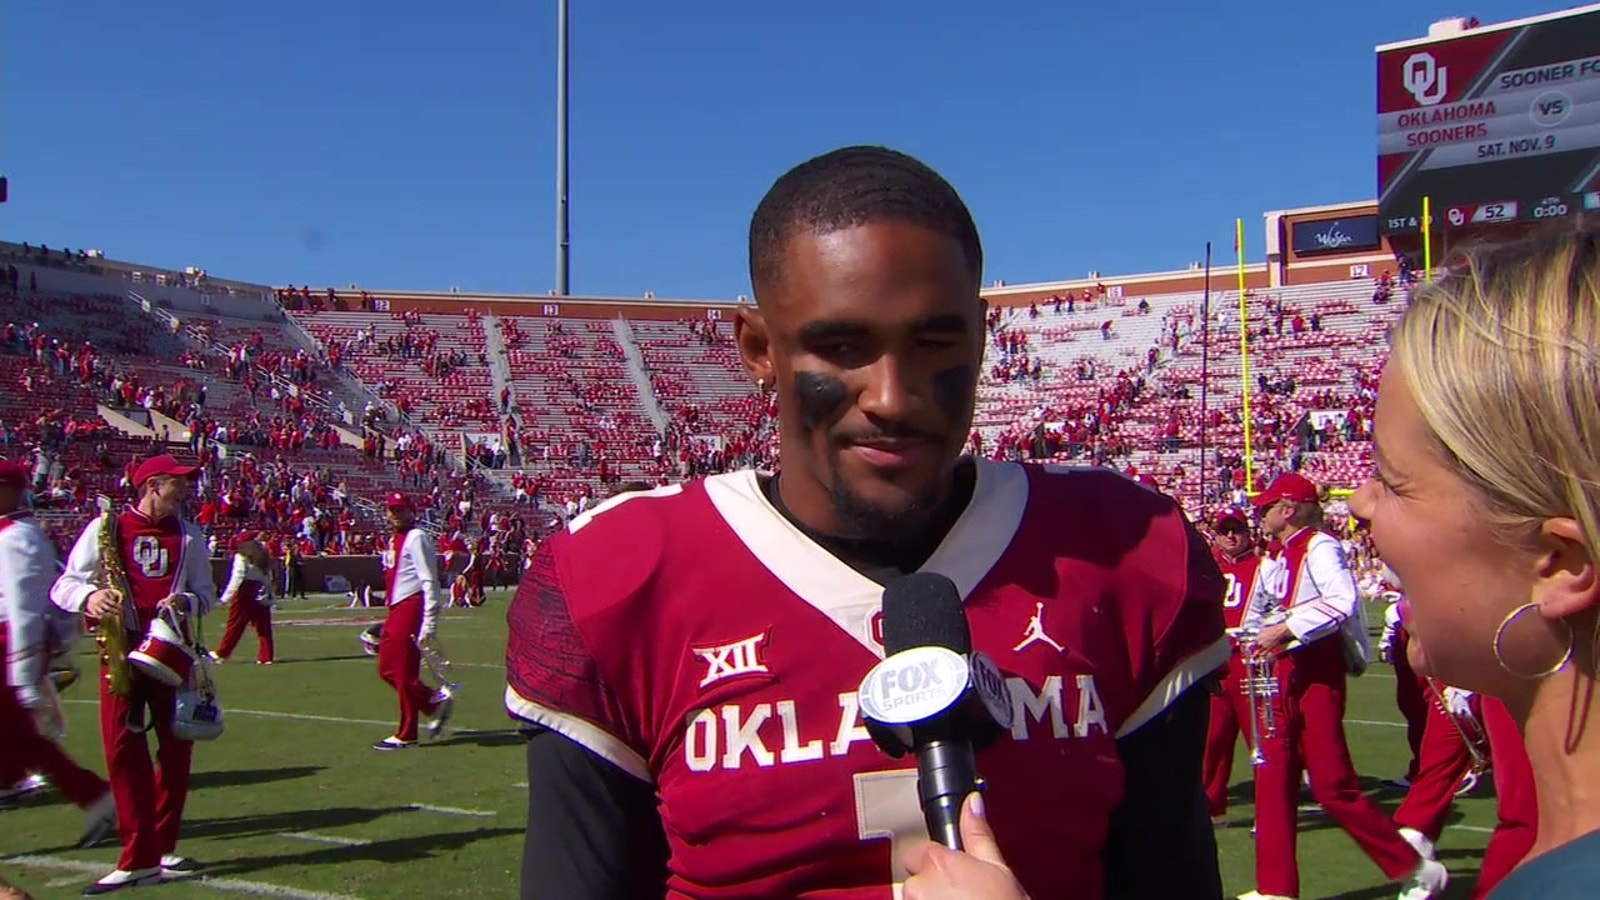 Watch Oklahoma QB Jalen Hurts' TDs vs. West Virginia & his postgame comments